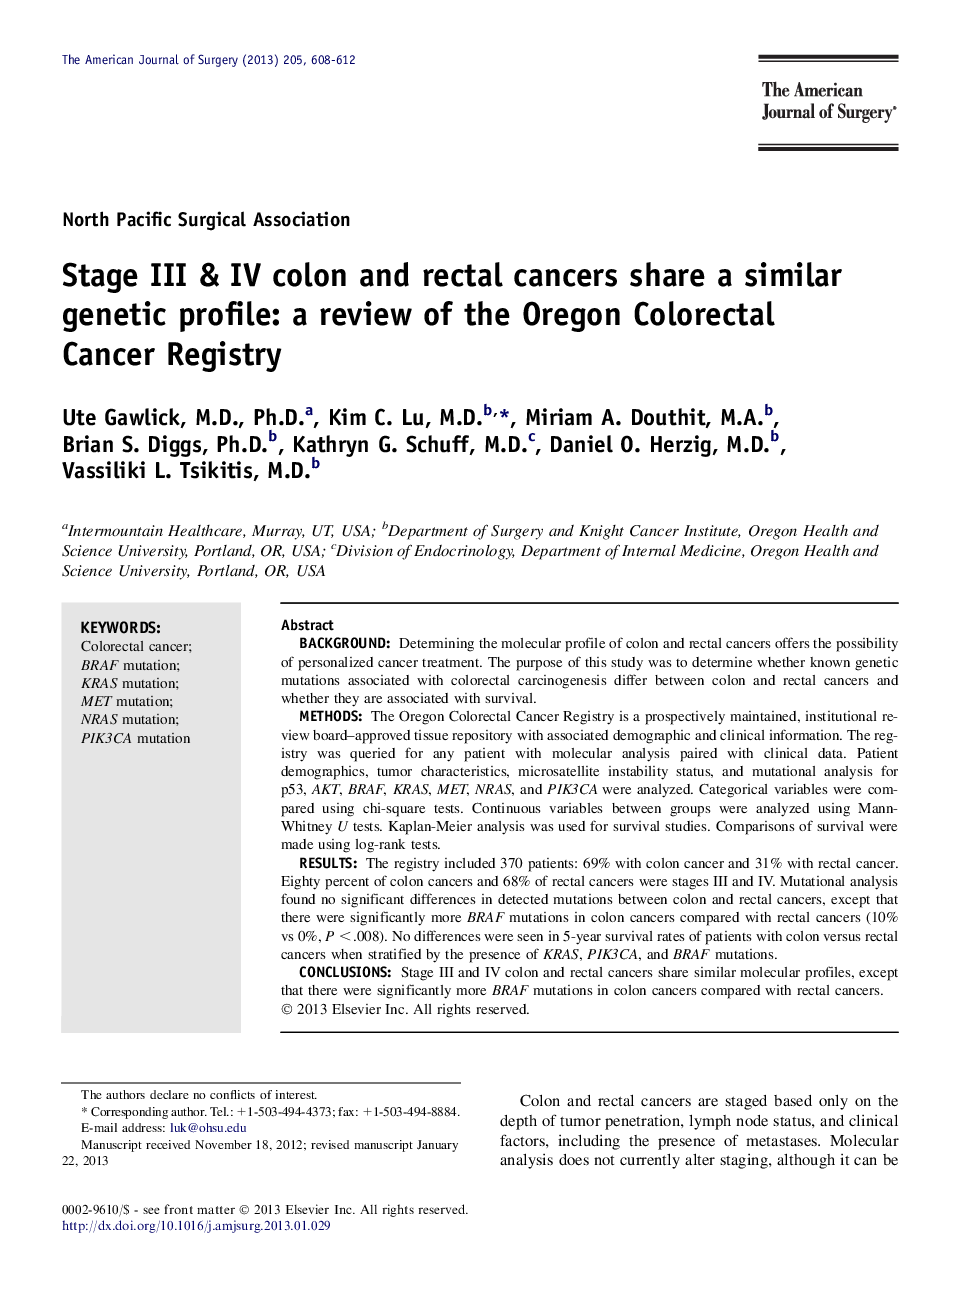 Stage III & IV colon and rectal cancers share a similar genetic profile: a review of the Oregon Colorectal Cancer Registry 